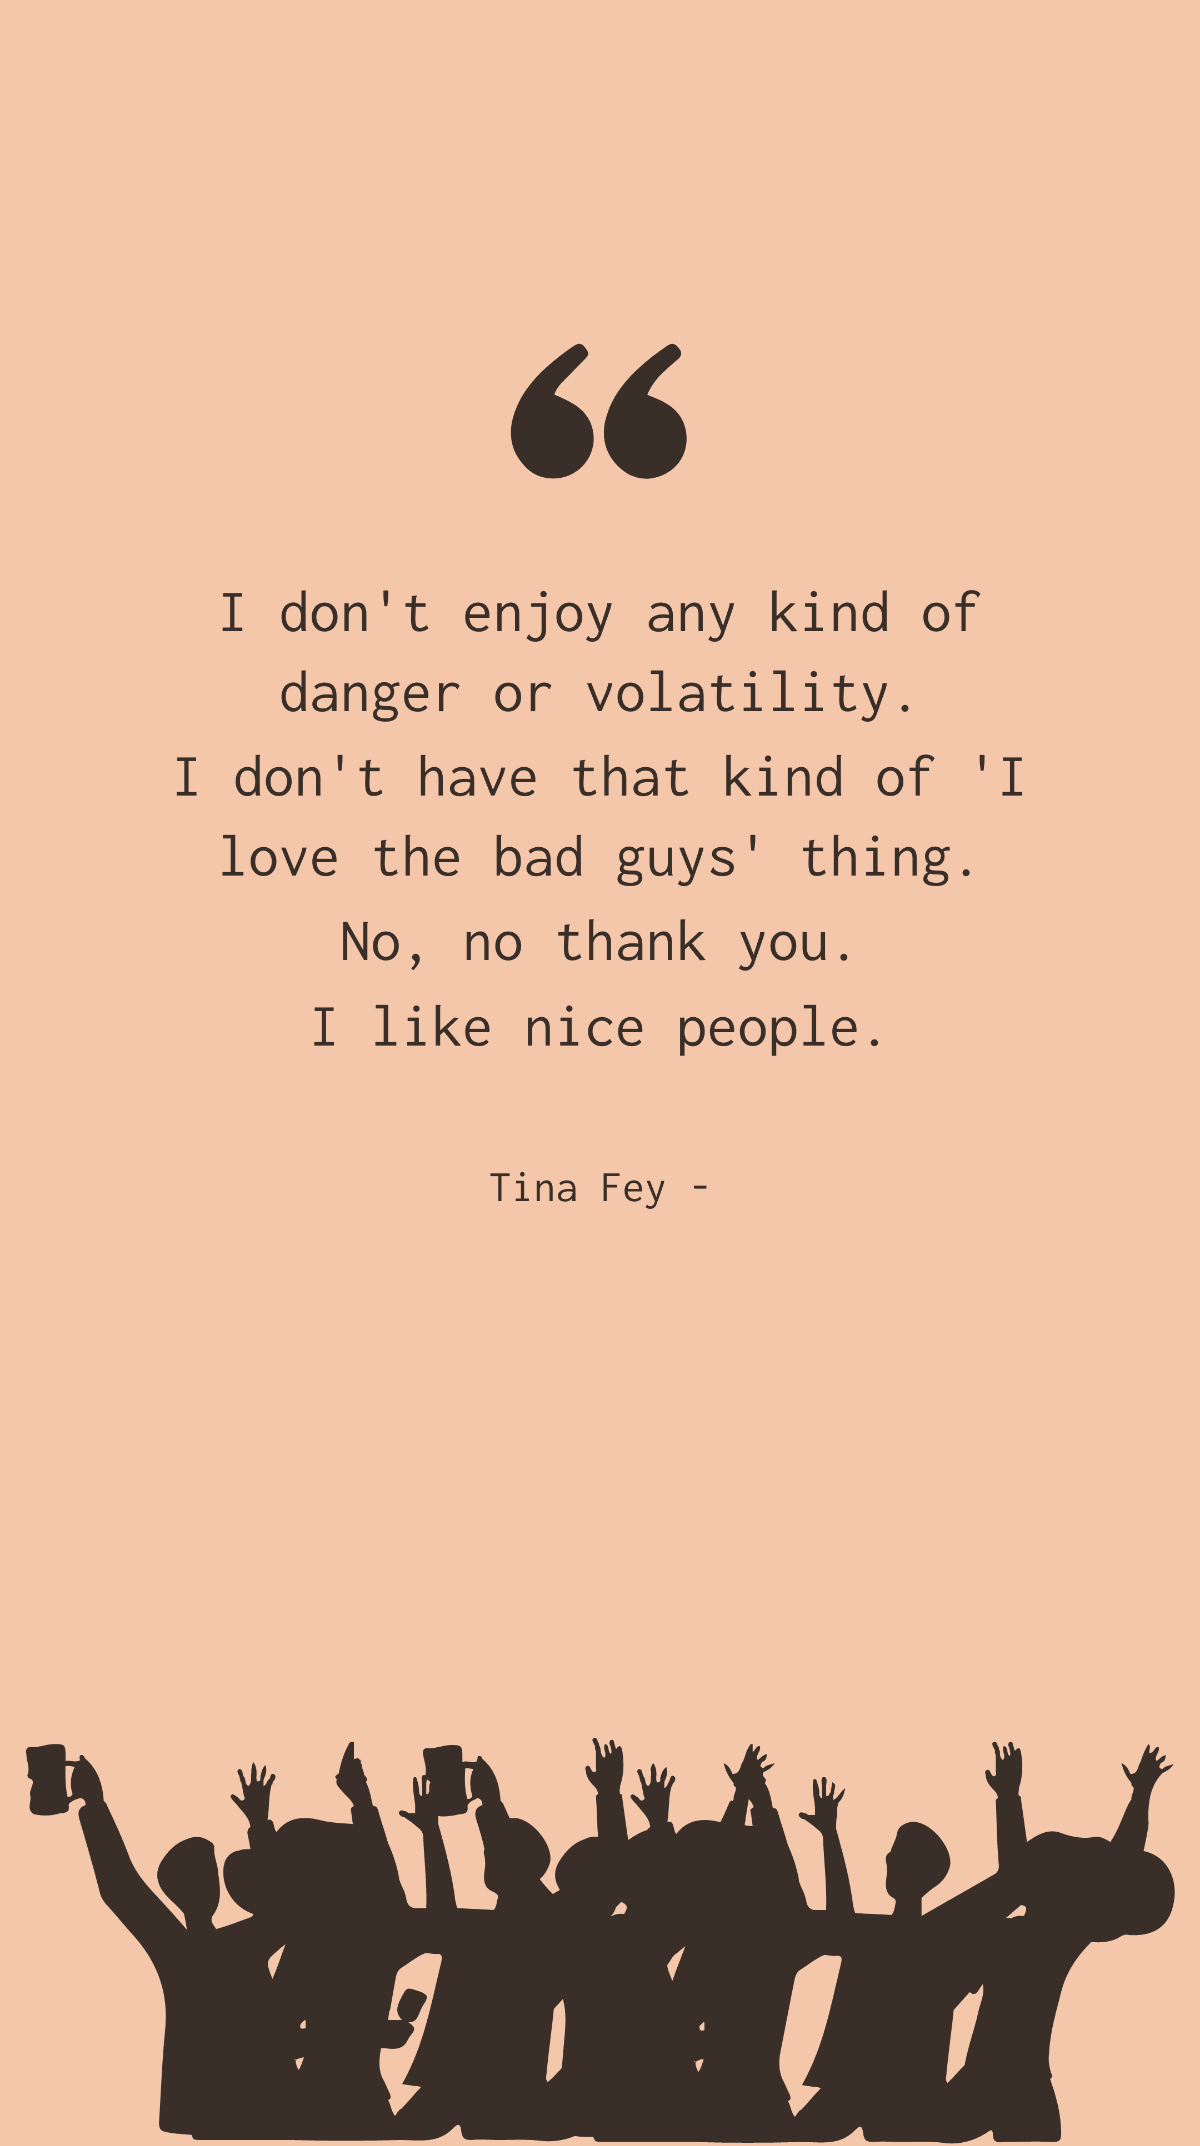 Tina Fey - I don't enjoy any kind of danger or volatility. I don't have that kind of 'I love the bad guys' thing. No, no thank you. I like nice people. Template